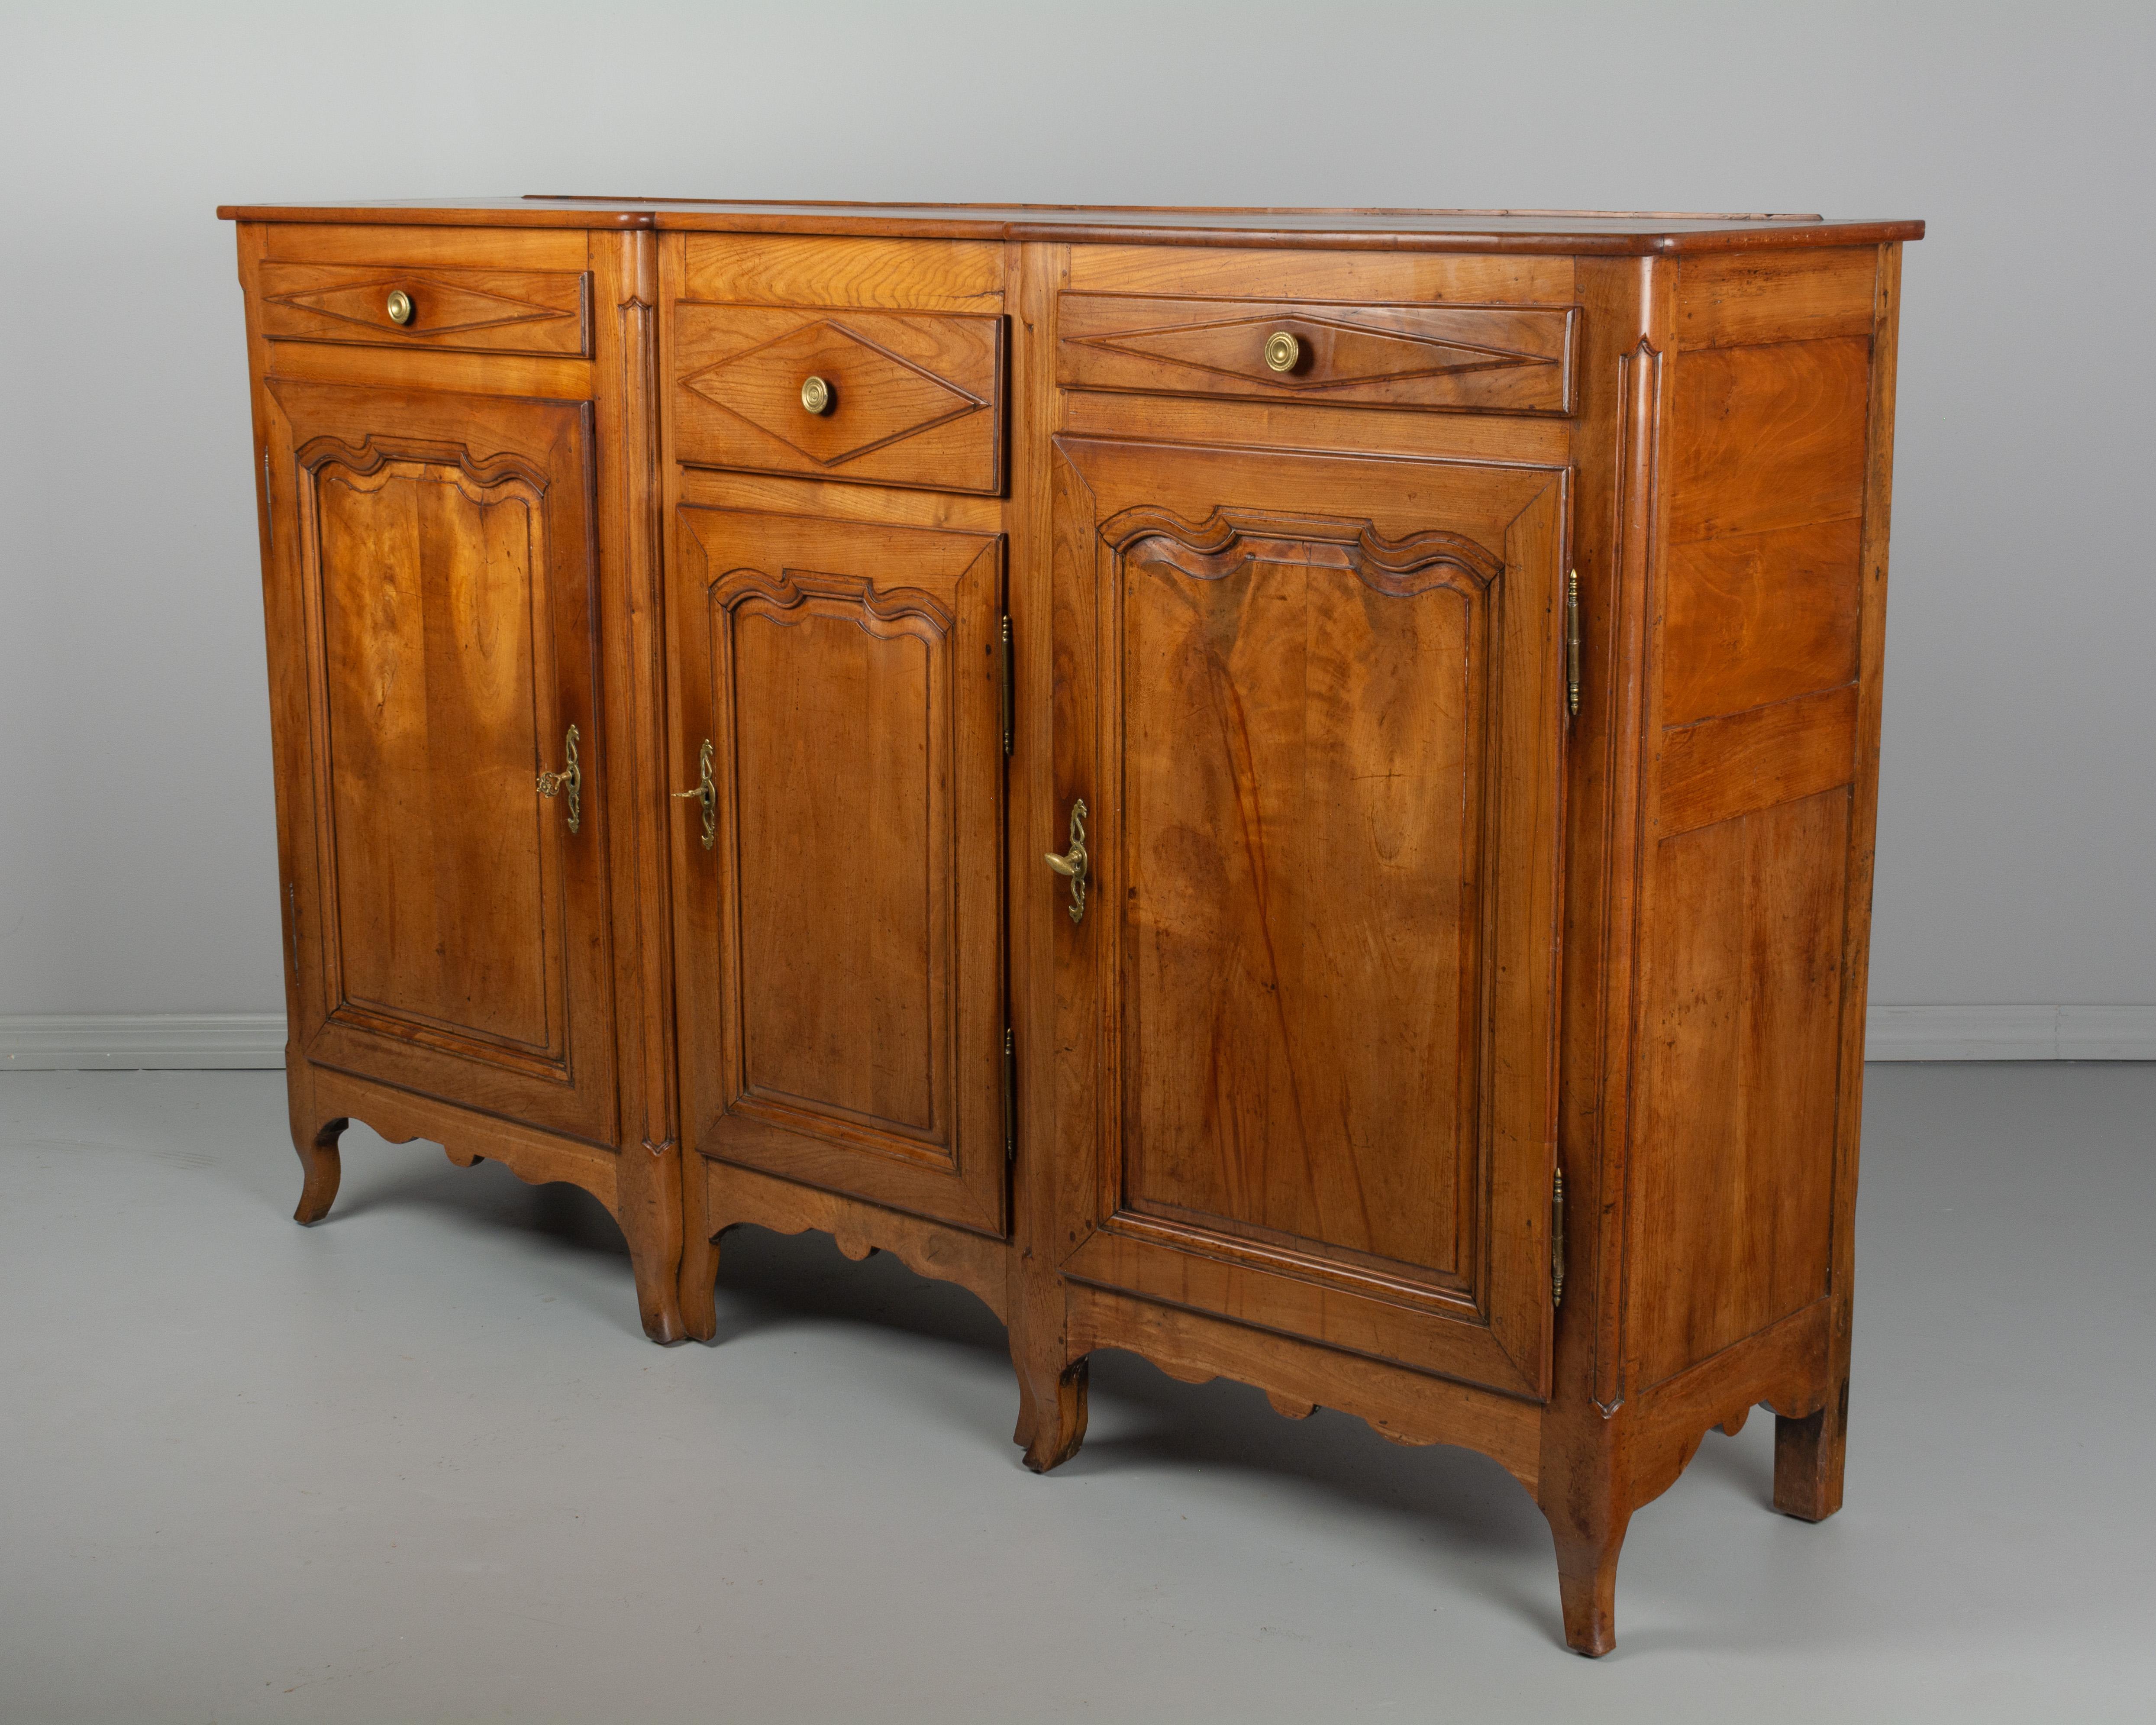 French Provincial 19th Century Country French Enfilade or Sideboard